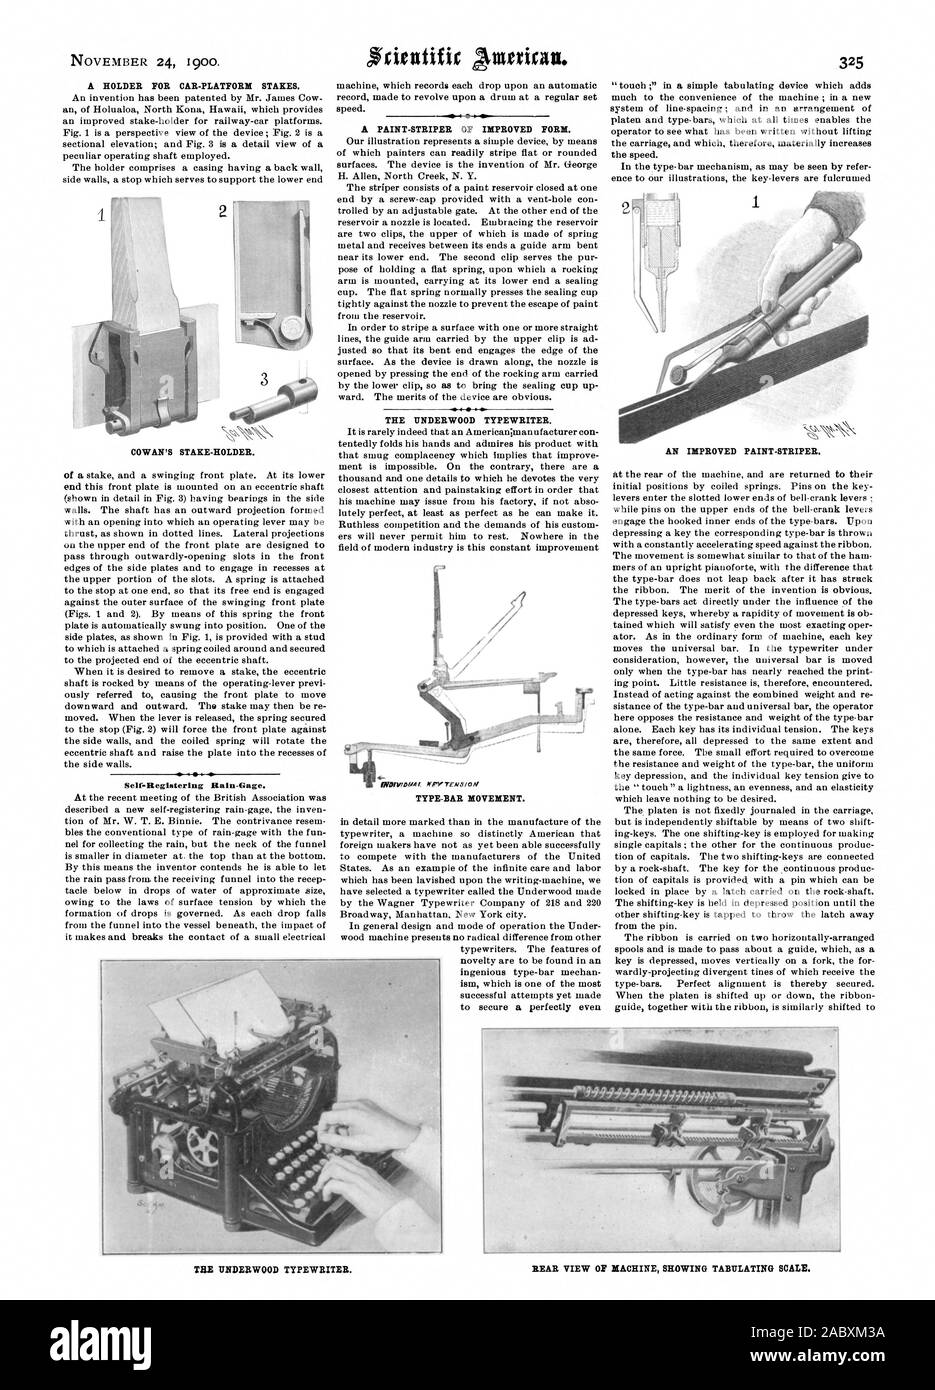 A HOLDER FOR CAR-PLATFORM STAKES. COWAN'S STAKE-HOLDER. Self-Registering Rain-Gage. THE UNDERWOOD TYPEWRITER. TYPE-BAR MOVEMENT. 4, scientific american, 1900-11-24 Stock Photo